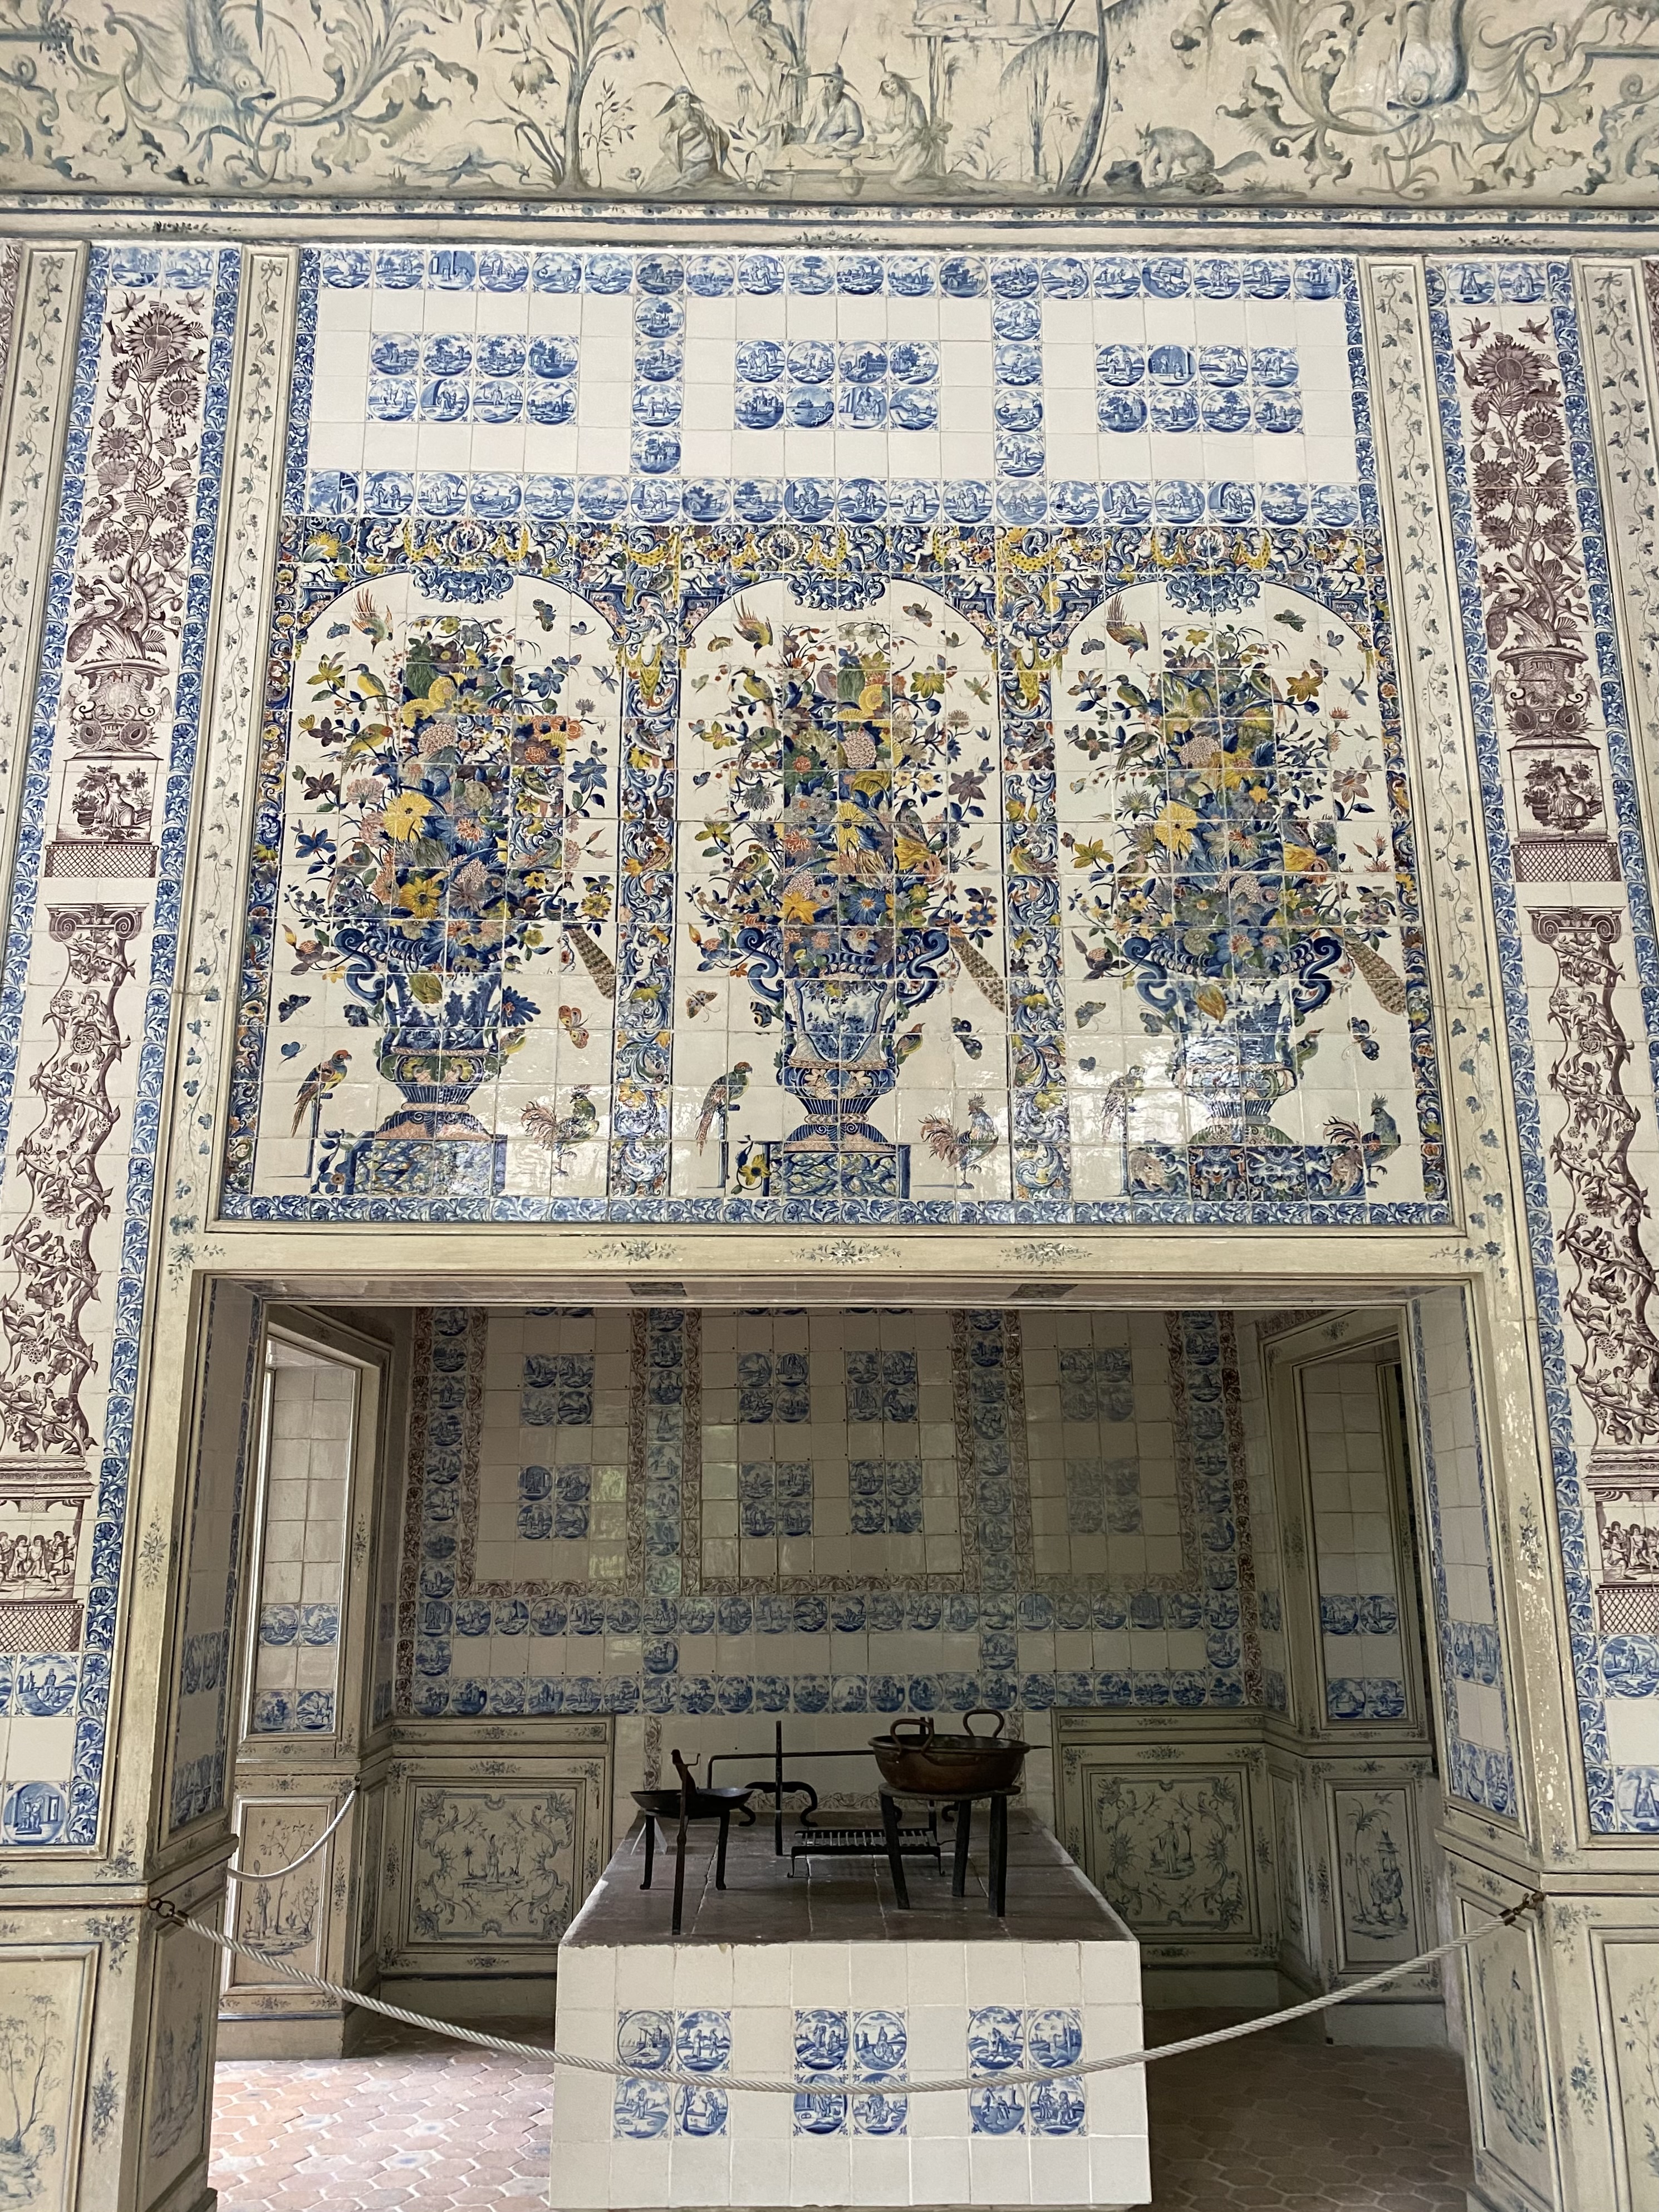 Kitchen in a Bavarian park palace with detailed tile decoration